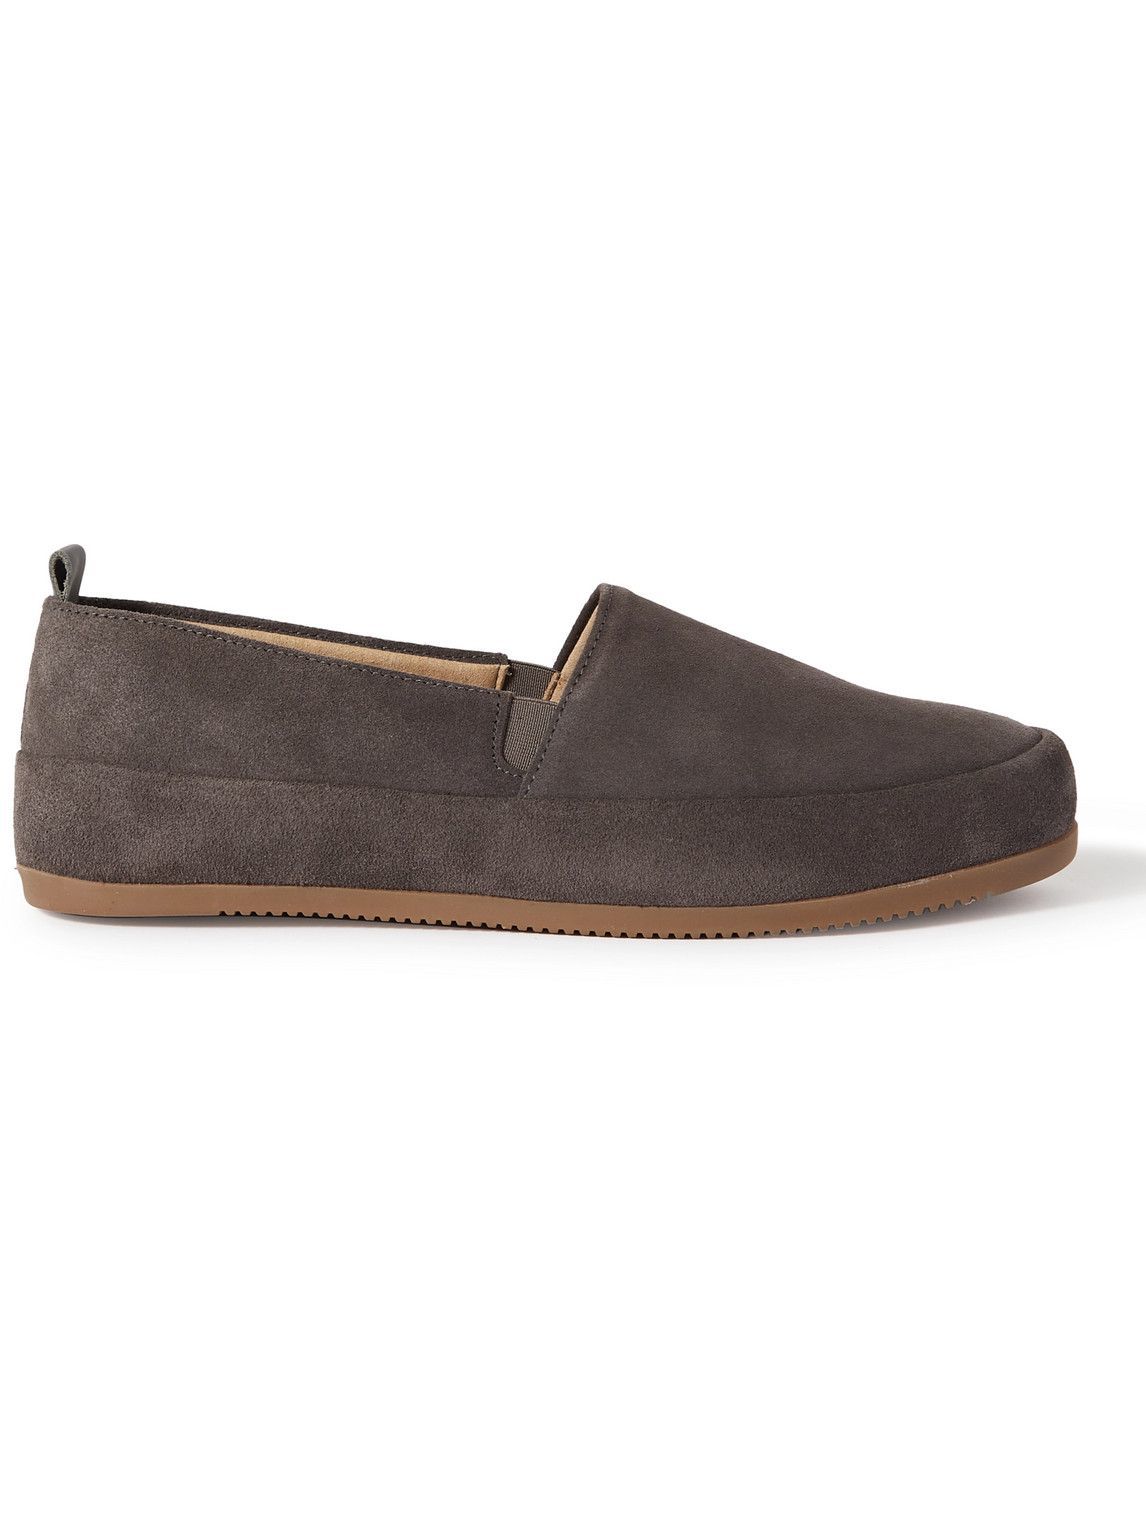 Mulo - Suede Loafers - Brown Mulo